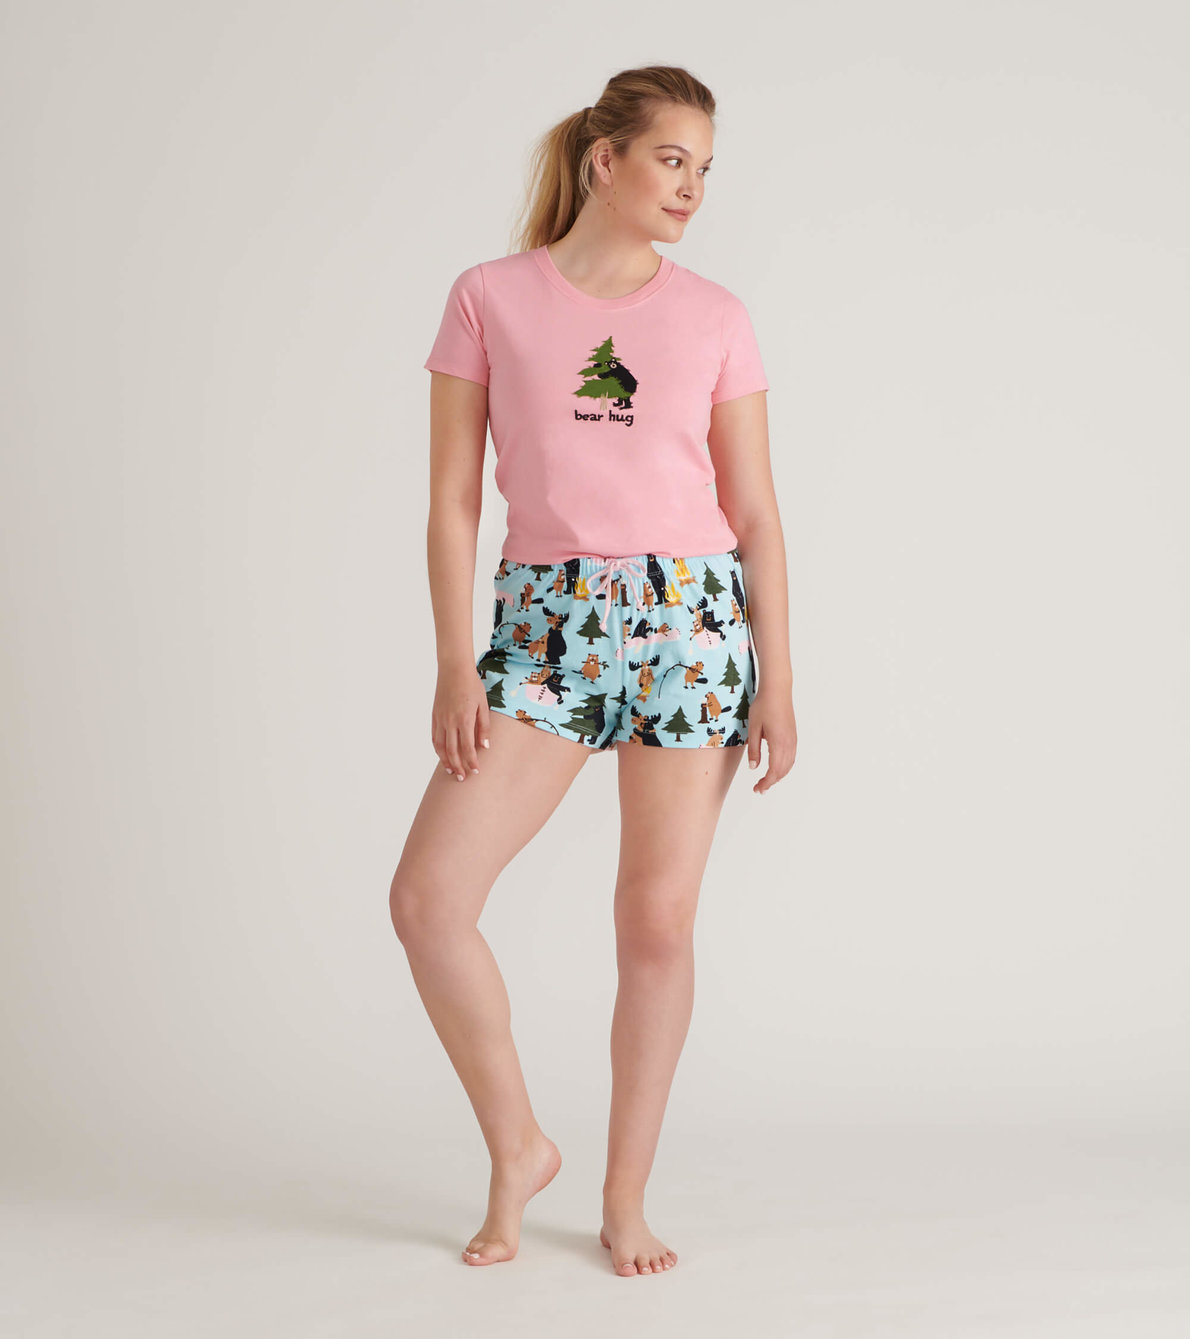 View larger image of Life in the Wild Women's Tee and Shorts Pajama Separates